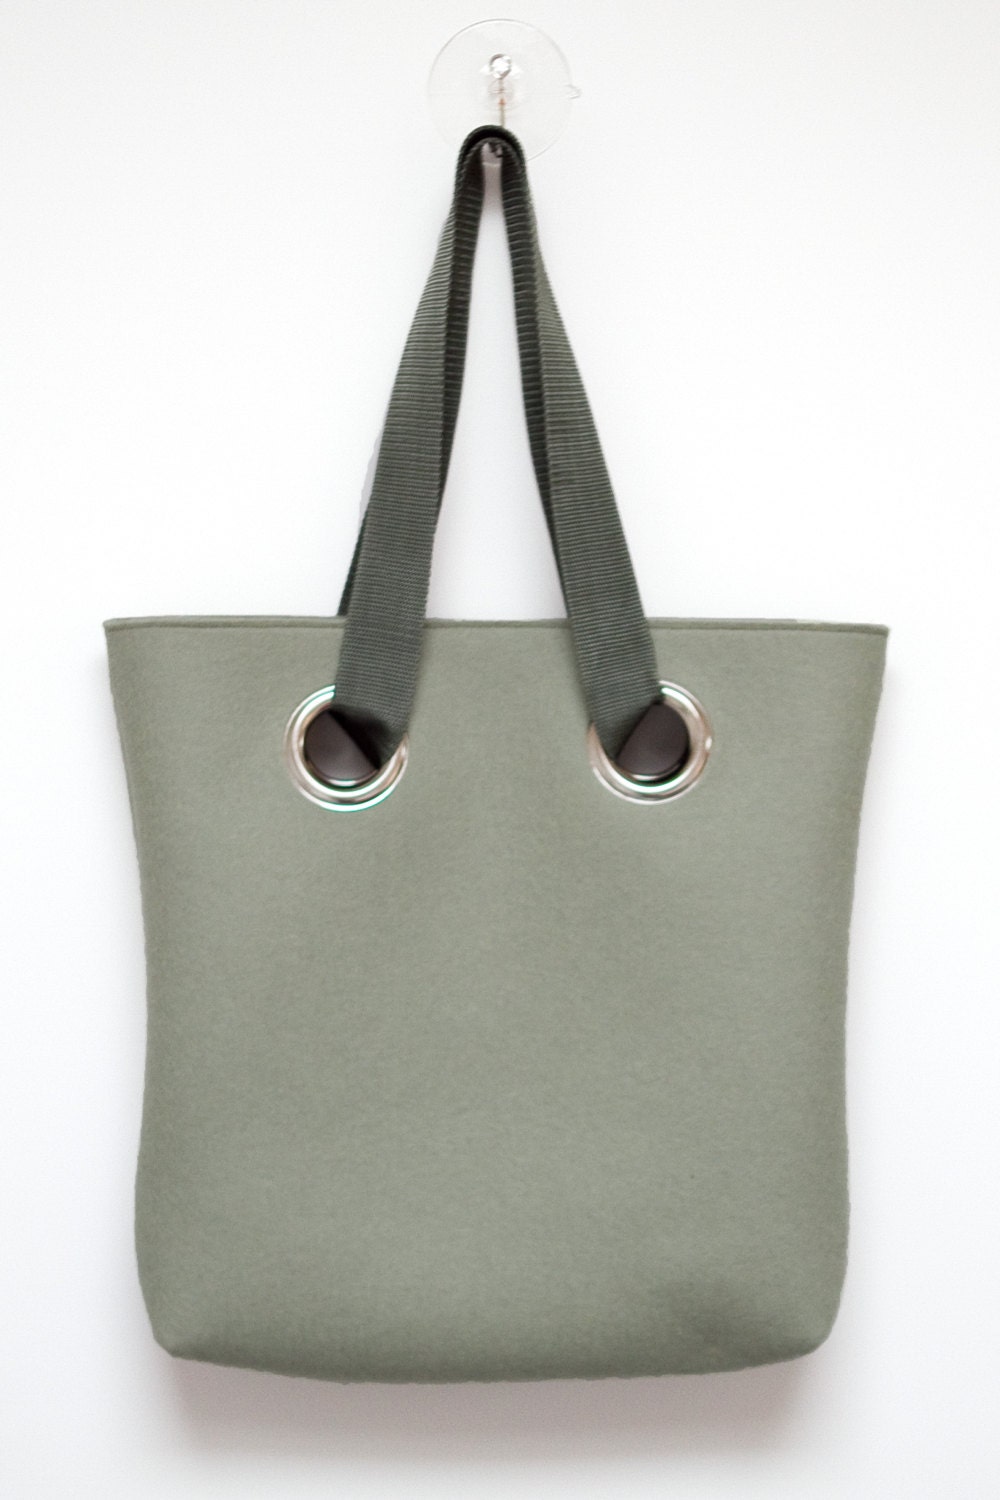 Felt tote bag with fabric strap and metal eyelets in by StudioBIG